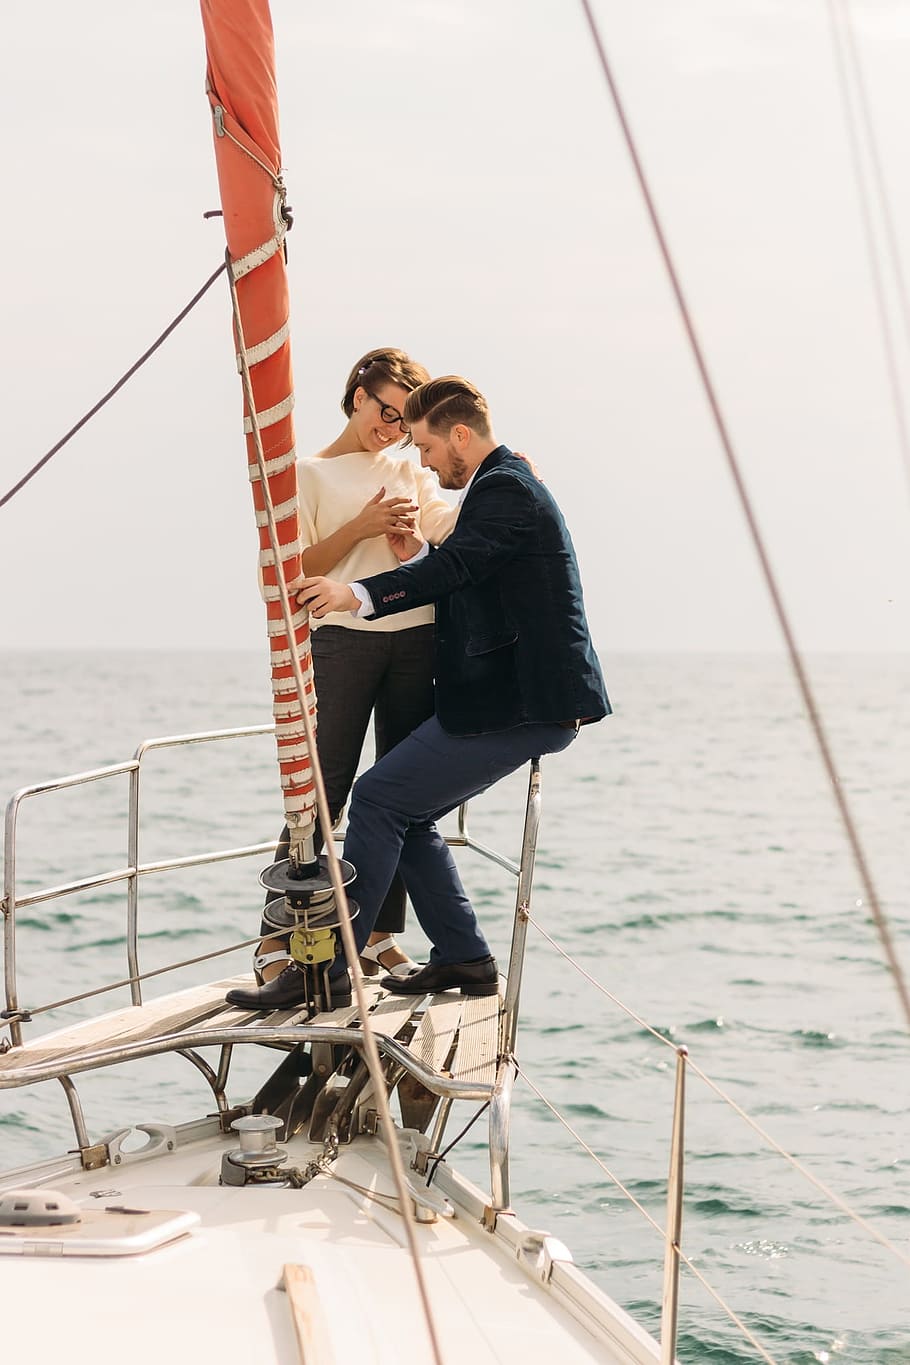 sea, sentence, date, yacht, ring, engagement, wedding, just married, couple, man